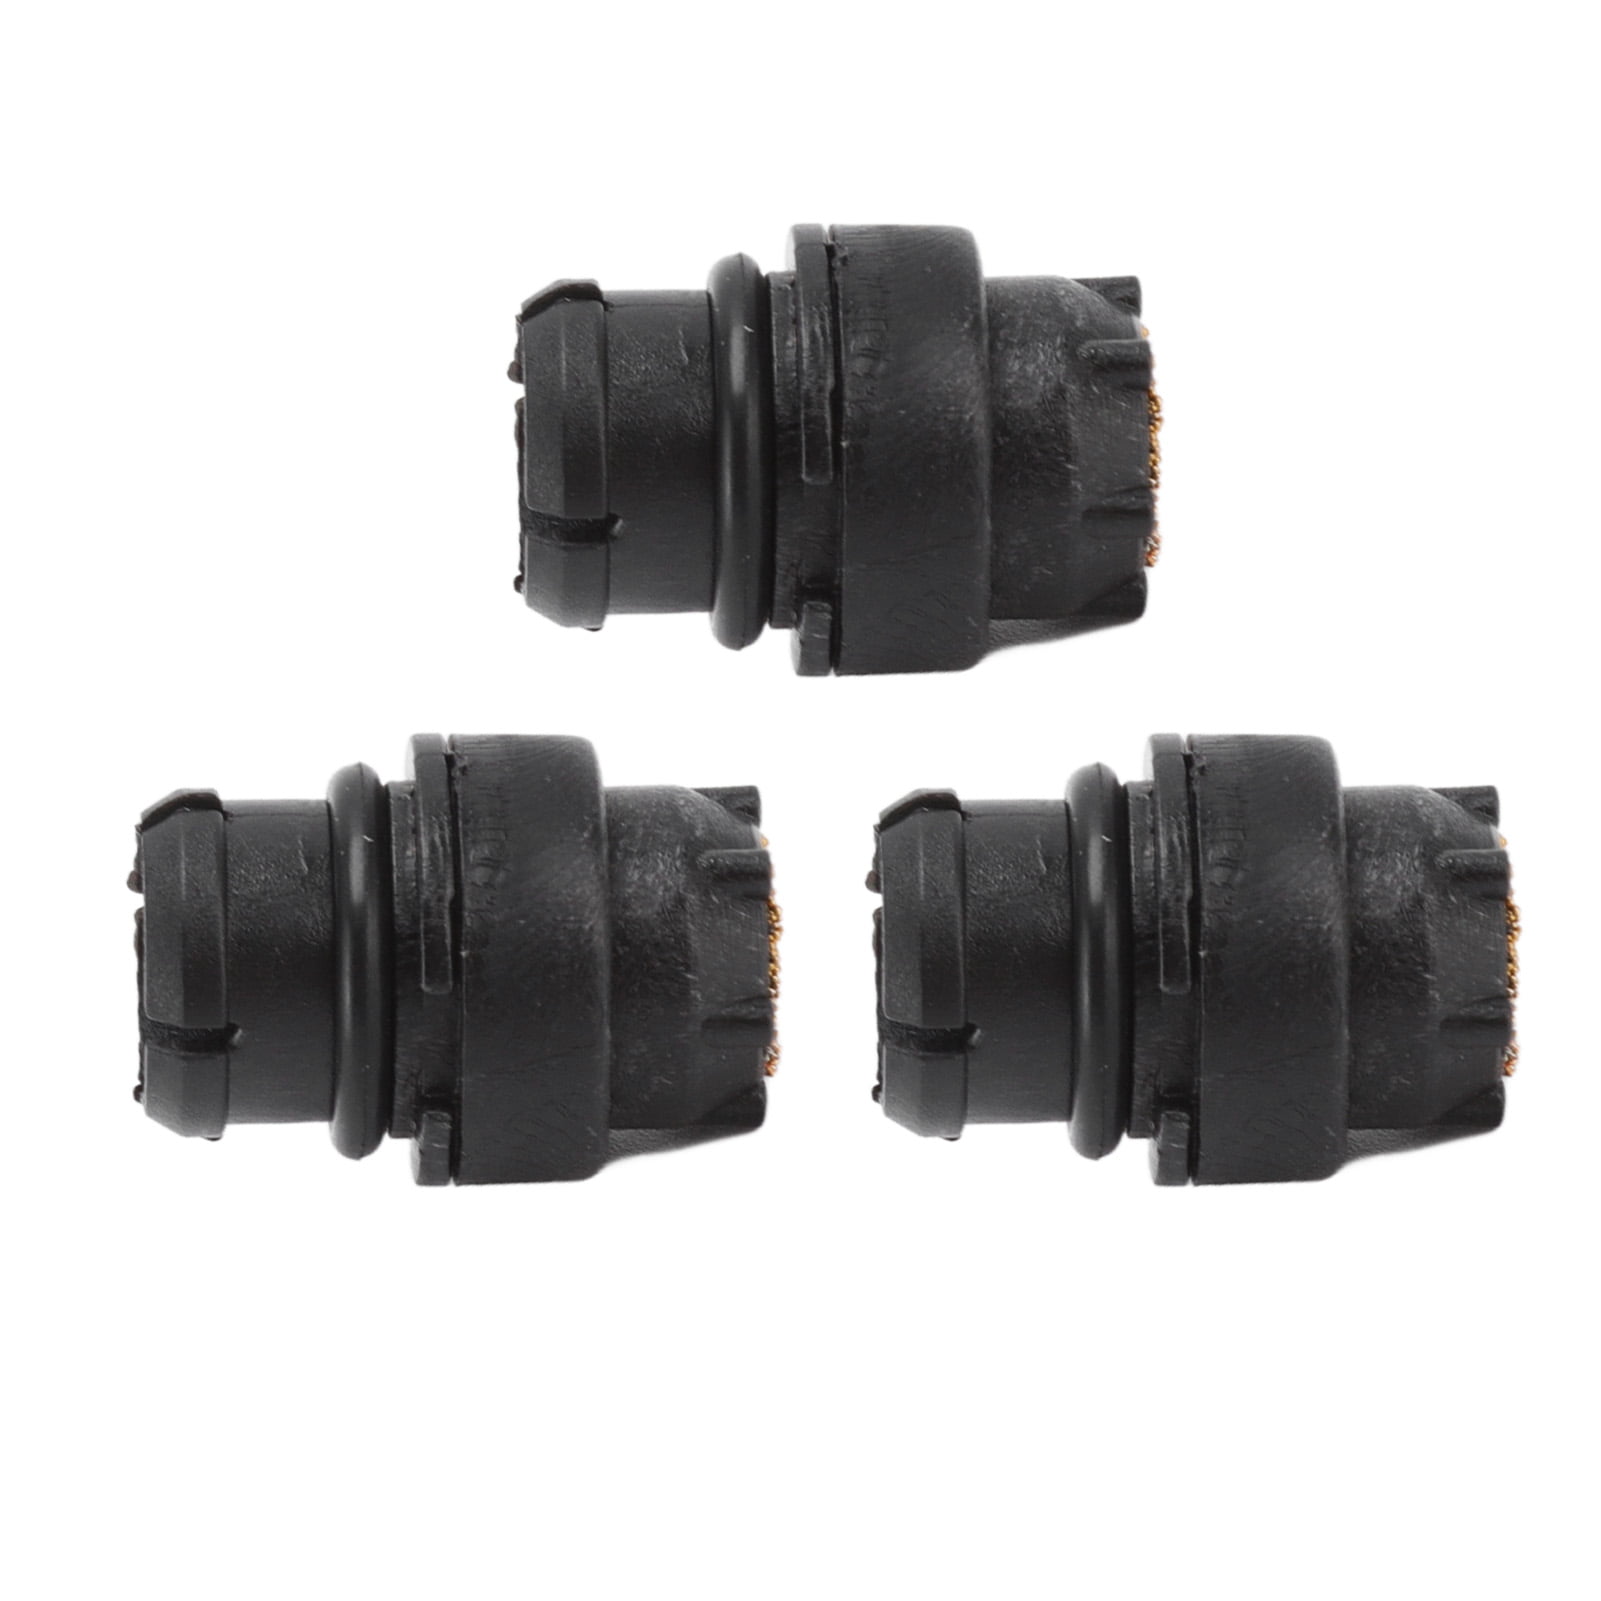 Chainsaw Fuel Tank Vent 3Pcs Replacement Gas Tank Vent Valve for Stihl 044 024 036 034 026 MS280 MS360 